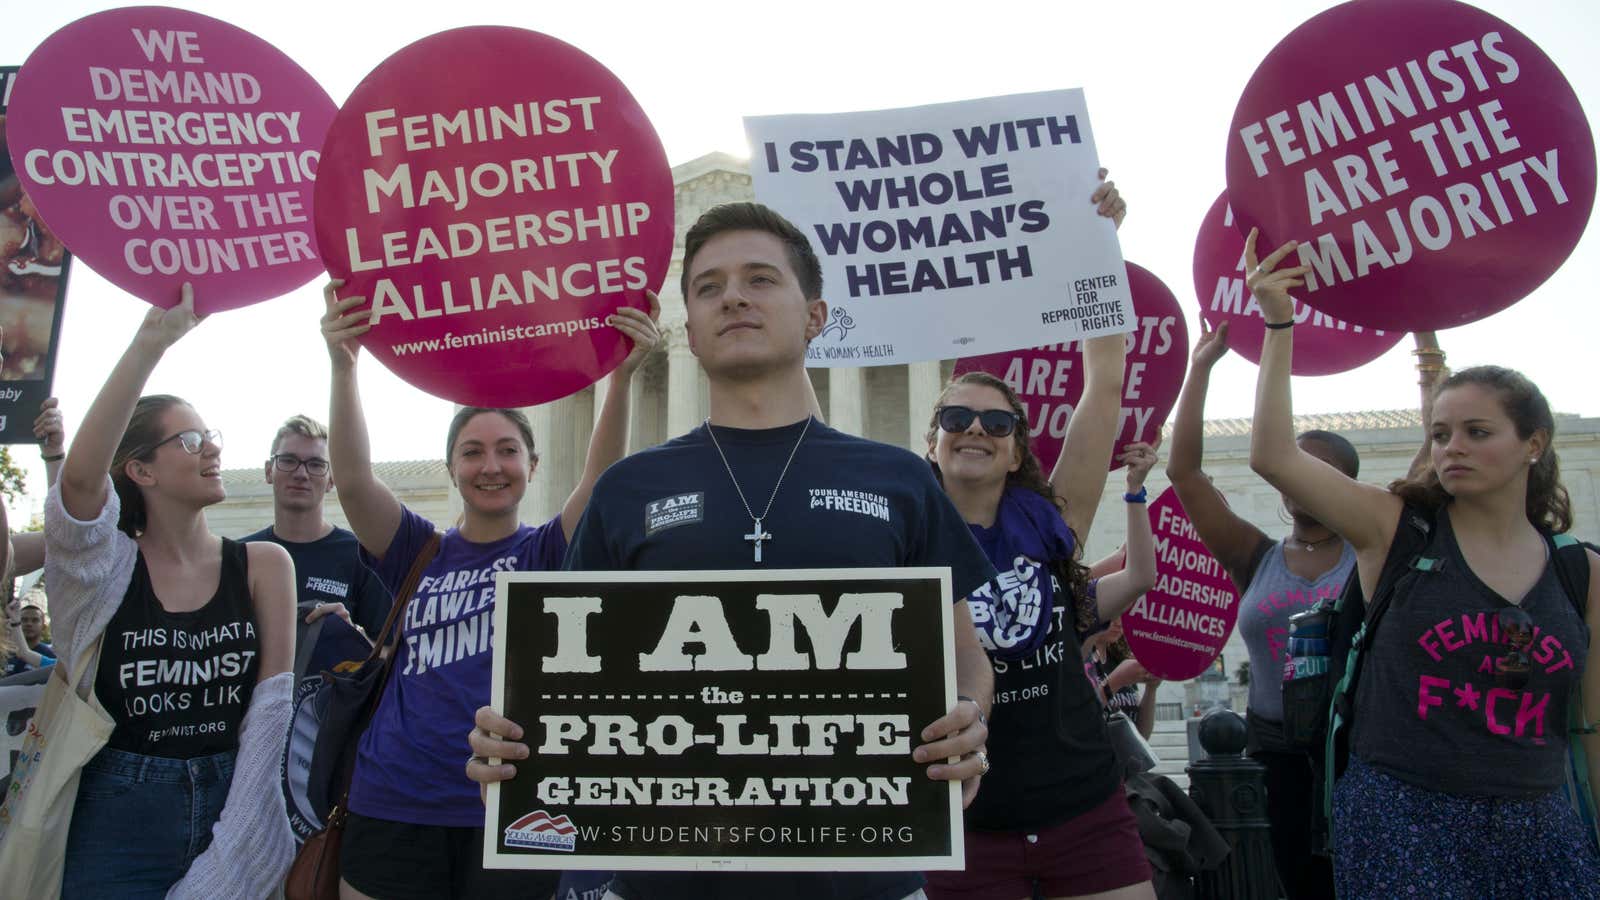 Anti-choice does not sound as bad as anti-life.